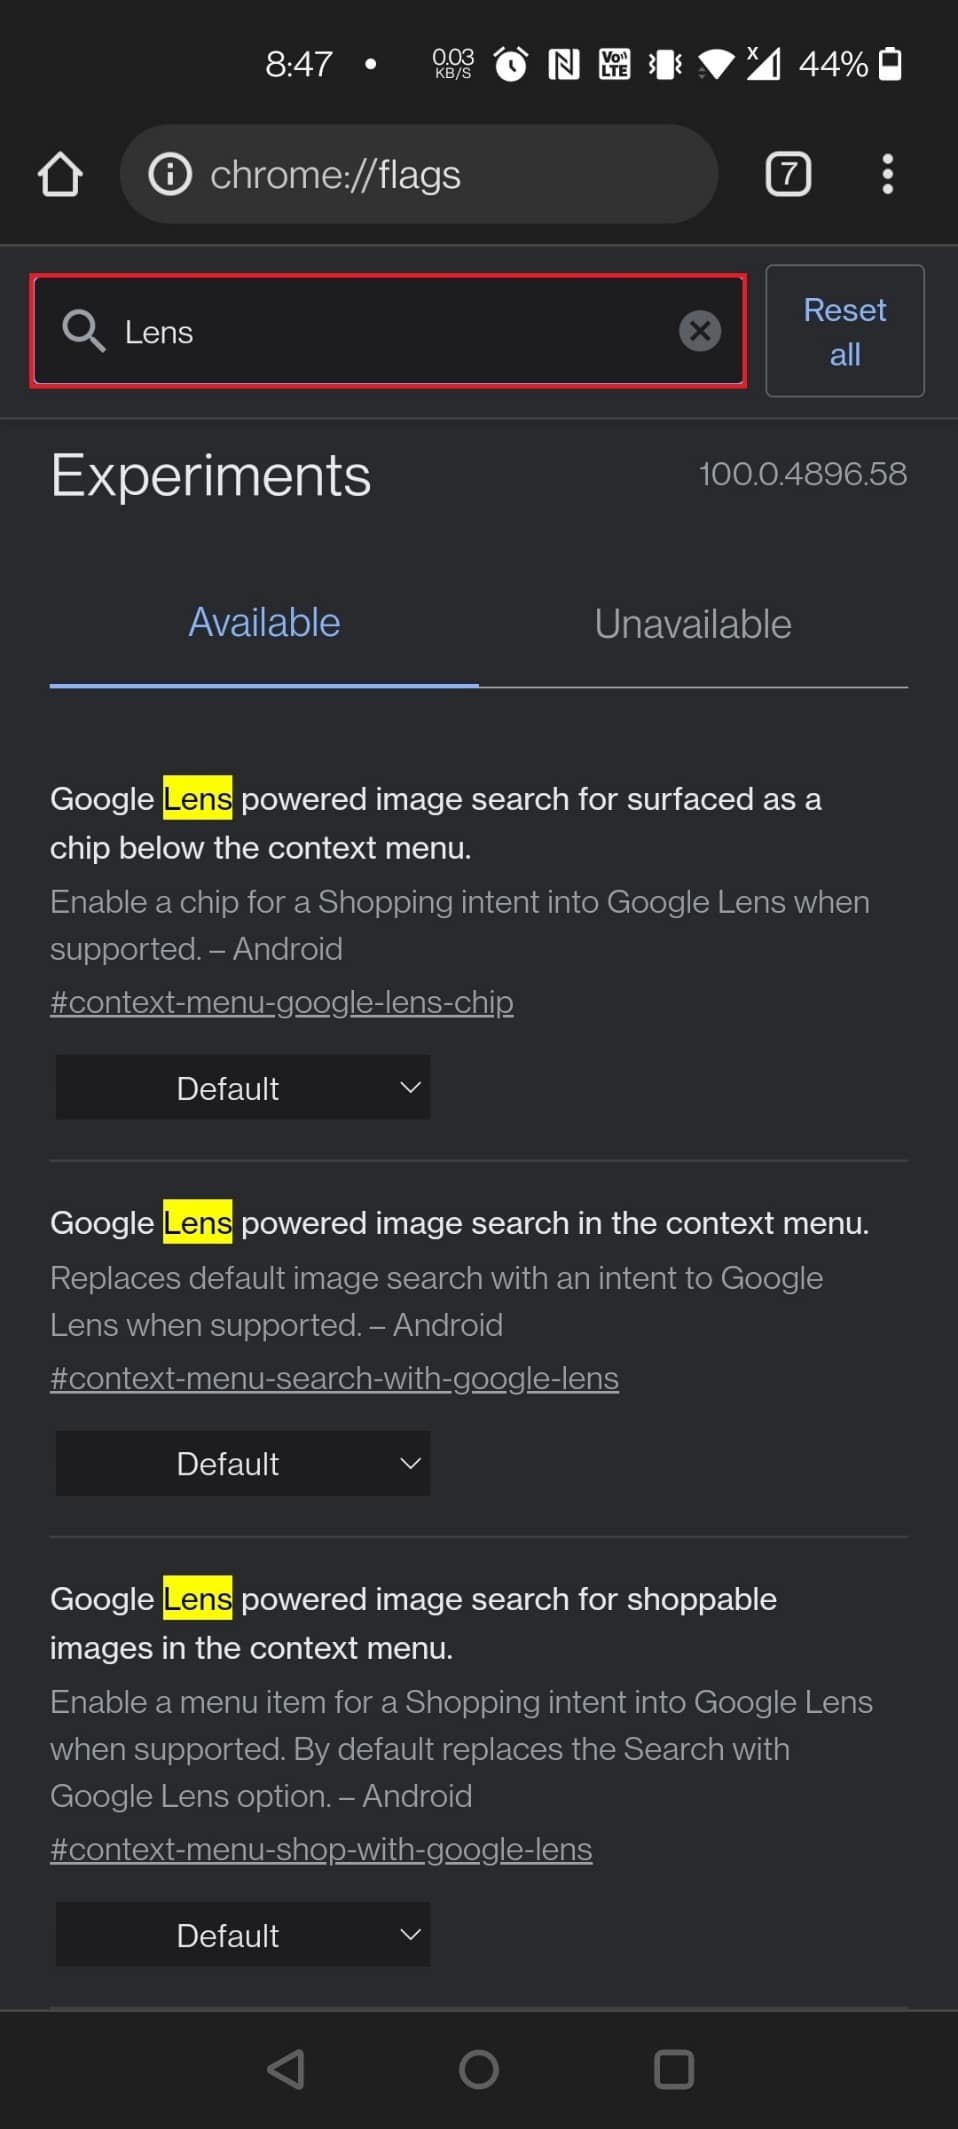 Type Lens in the search bar